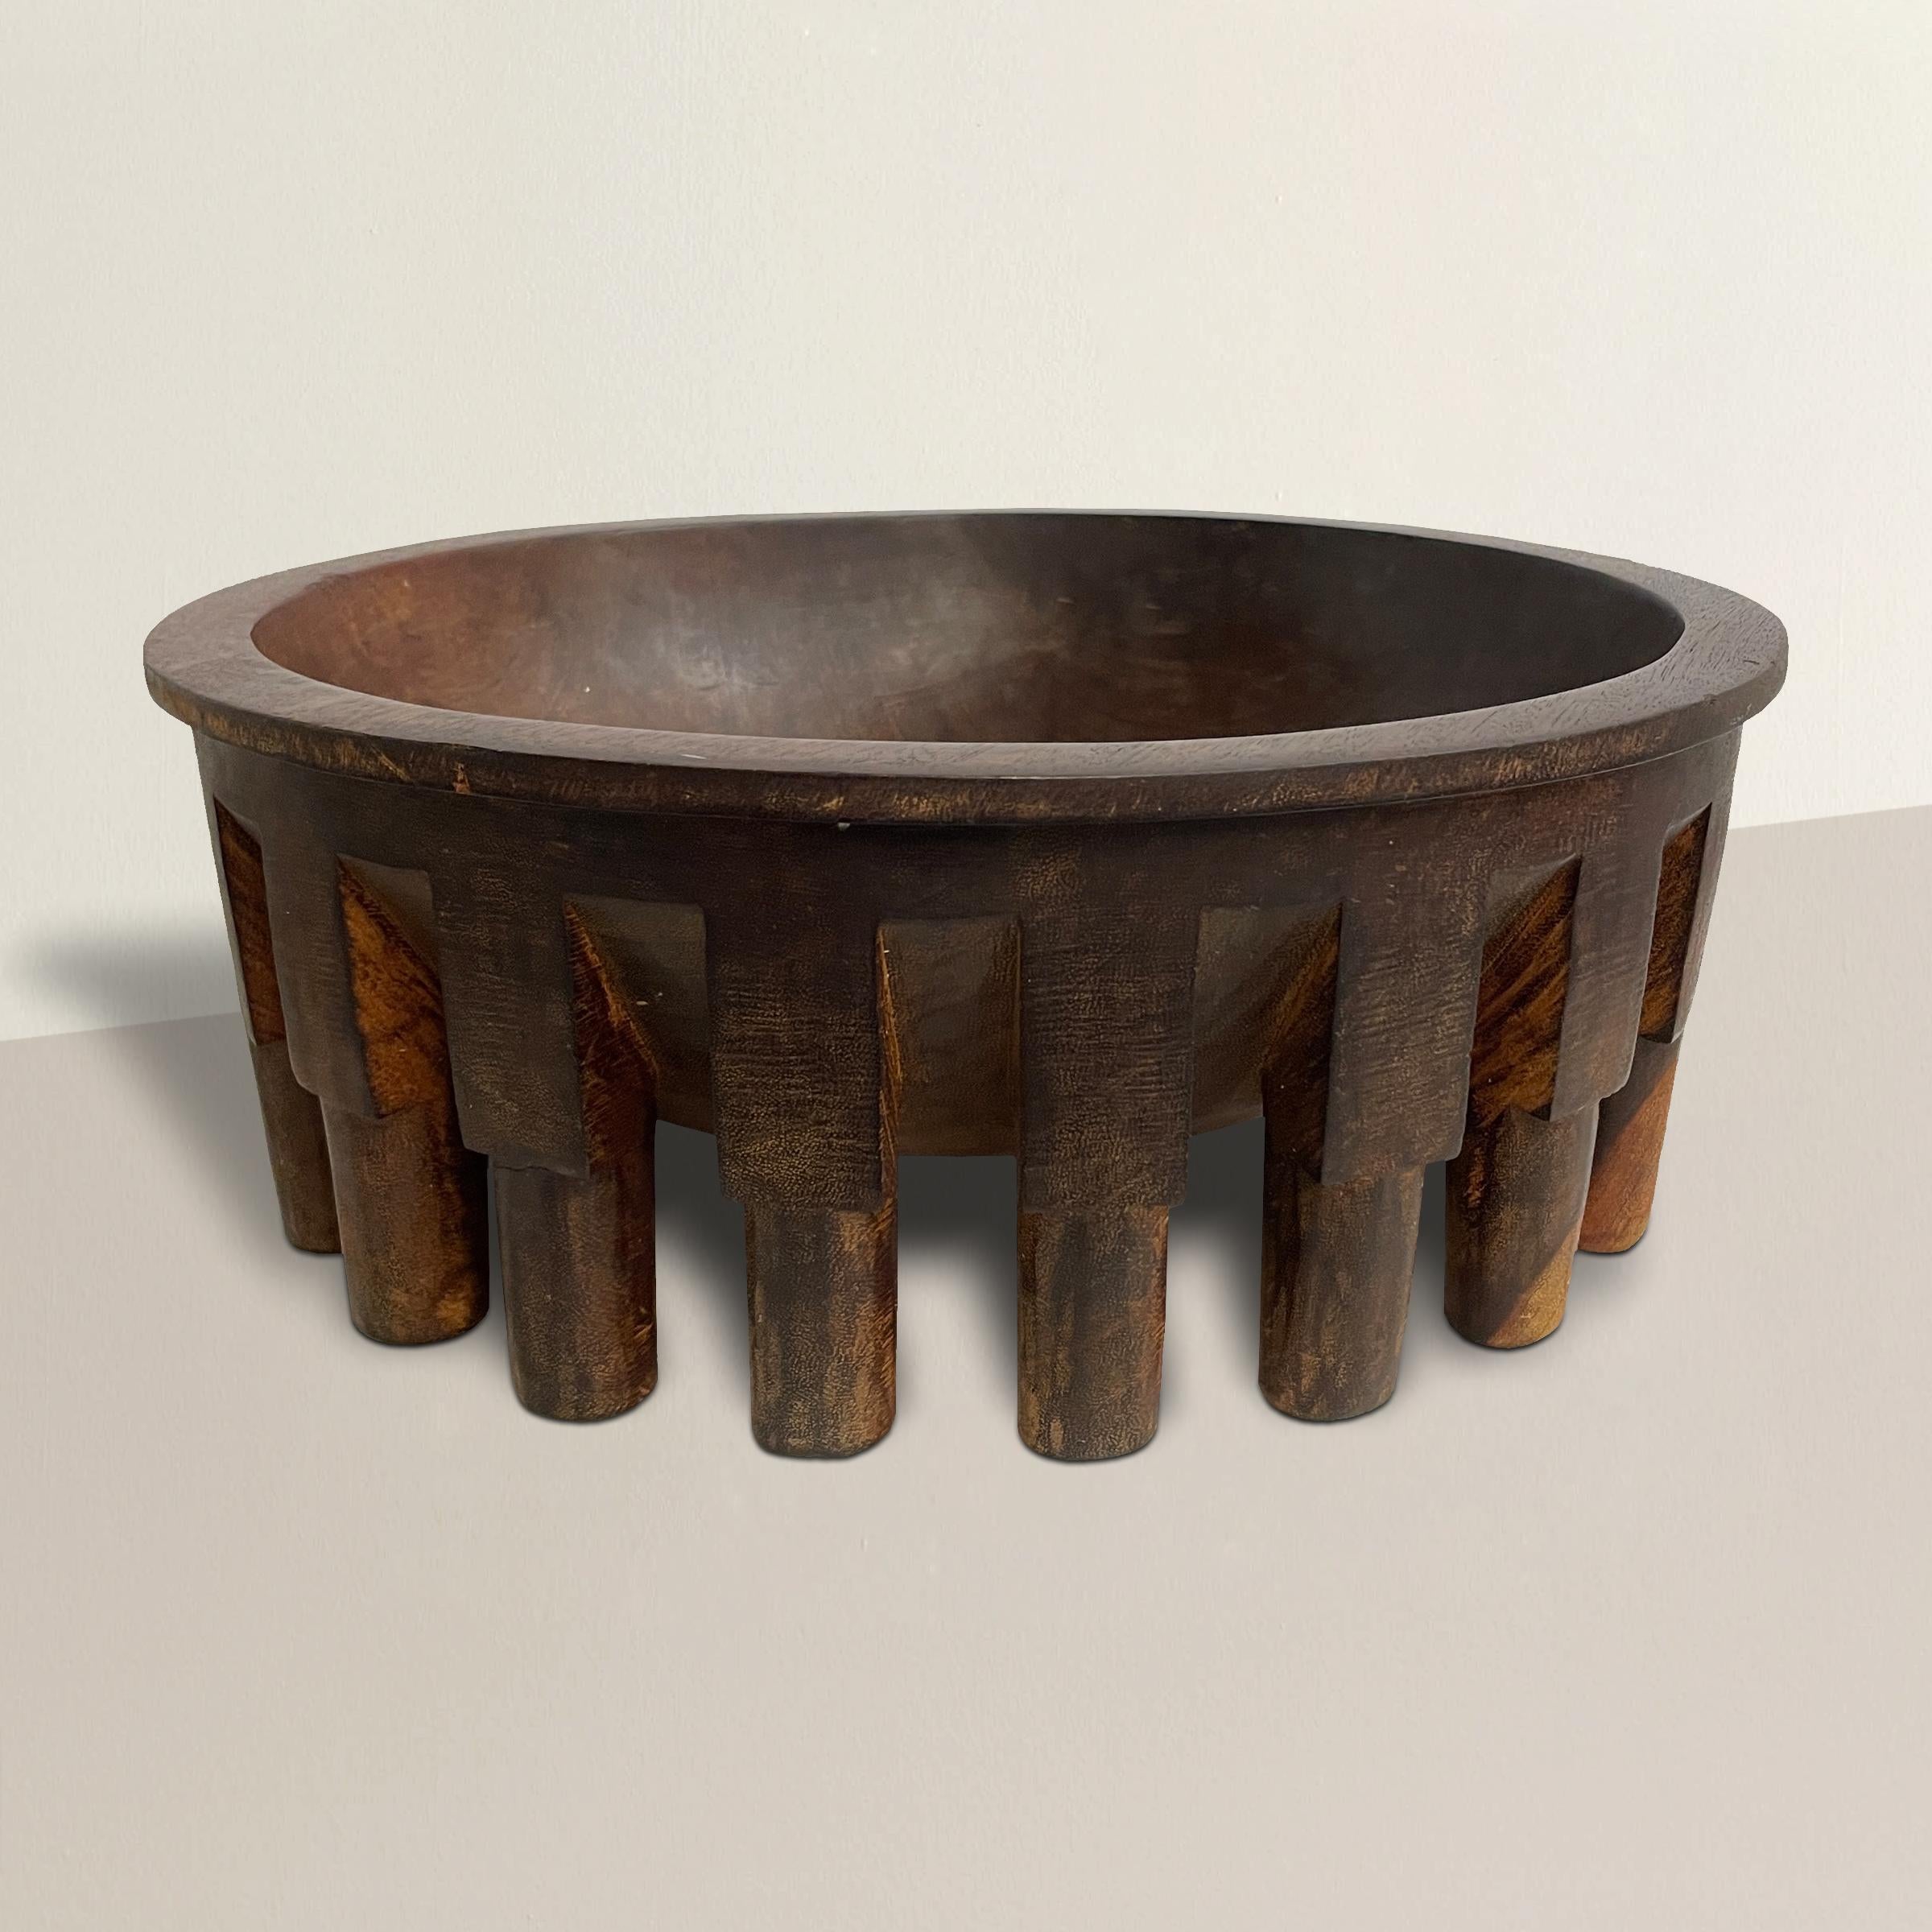 A large 20th Century Samoan circular wooden kava bowl called a tanoa fai'ava and carved from a single piece of wood, standing on twenty round legs, and a hole on one side that was originally used for hanging when not in use.

Kava bowls are used